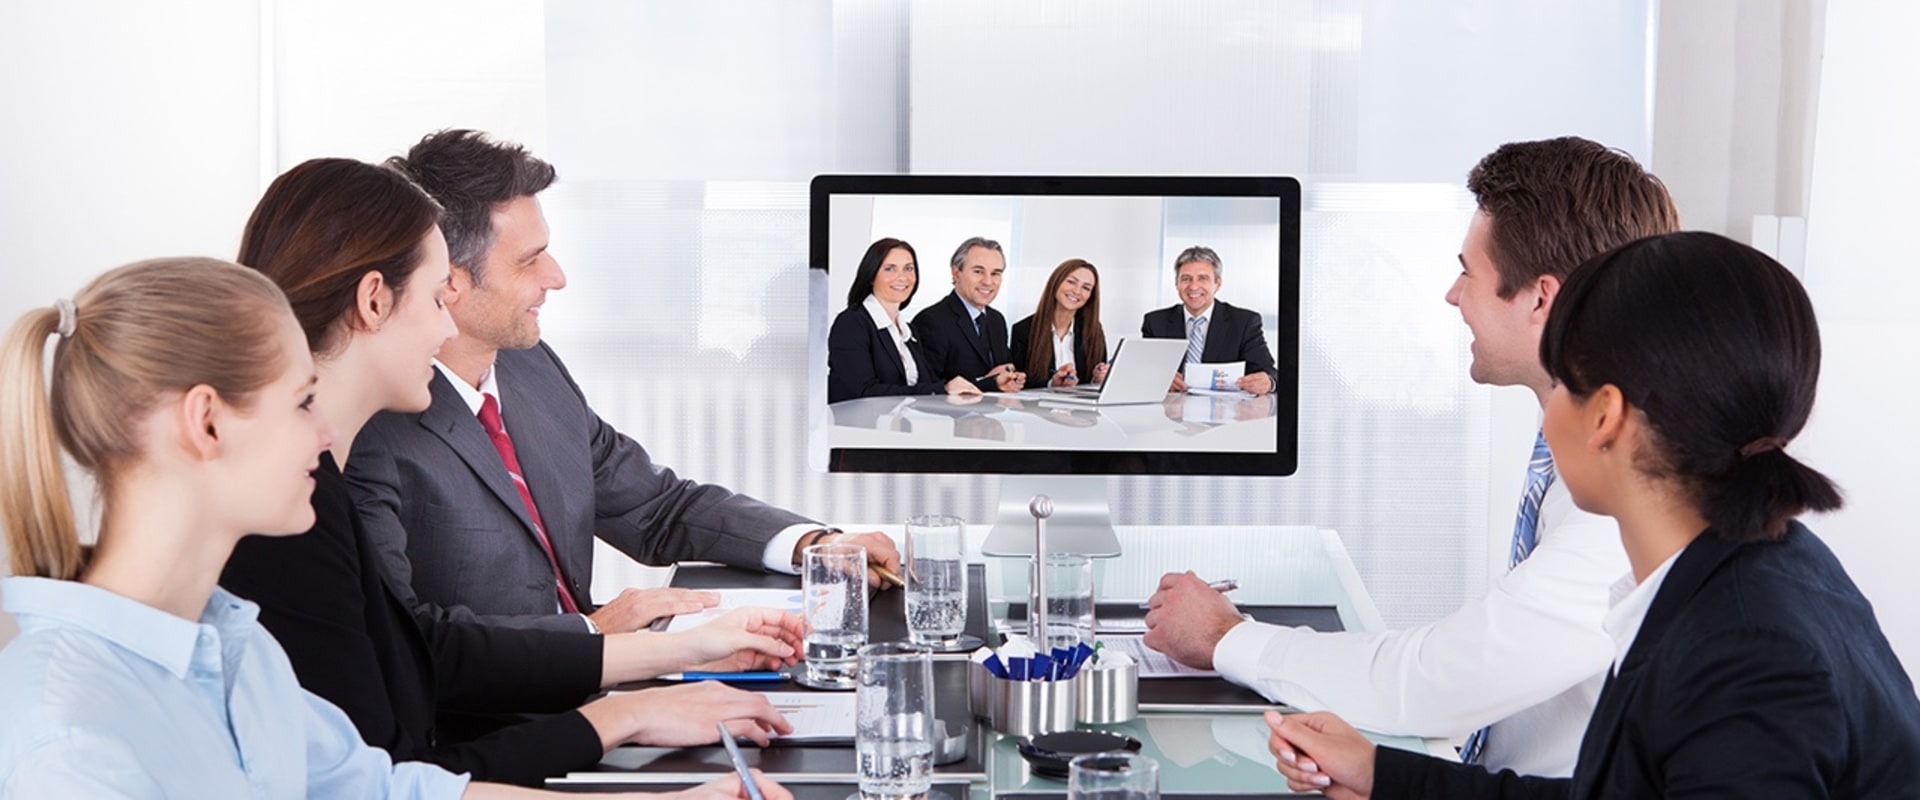 Top Rated Video Conferencing and Collaboration Tools of 2023